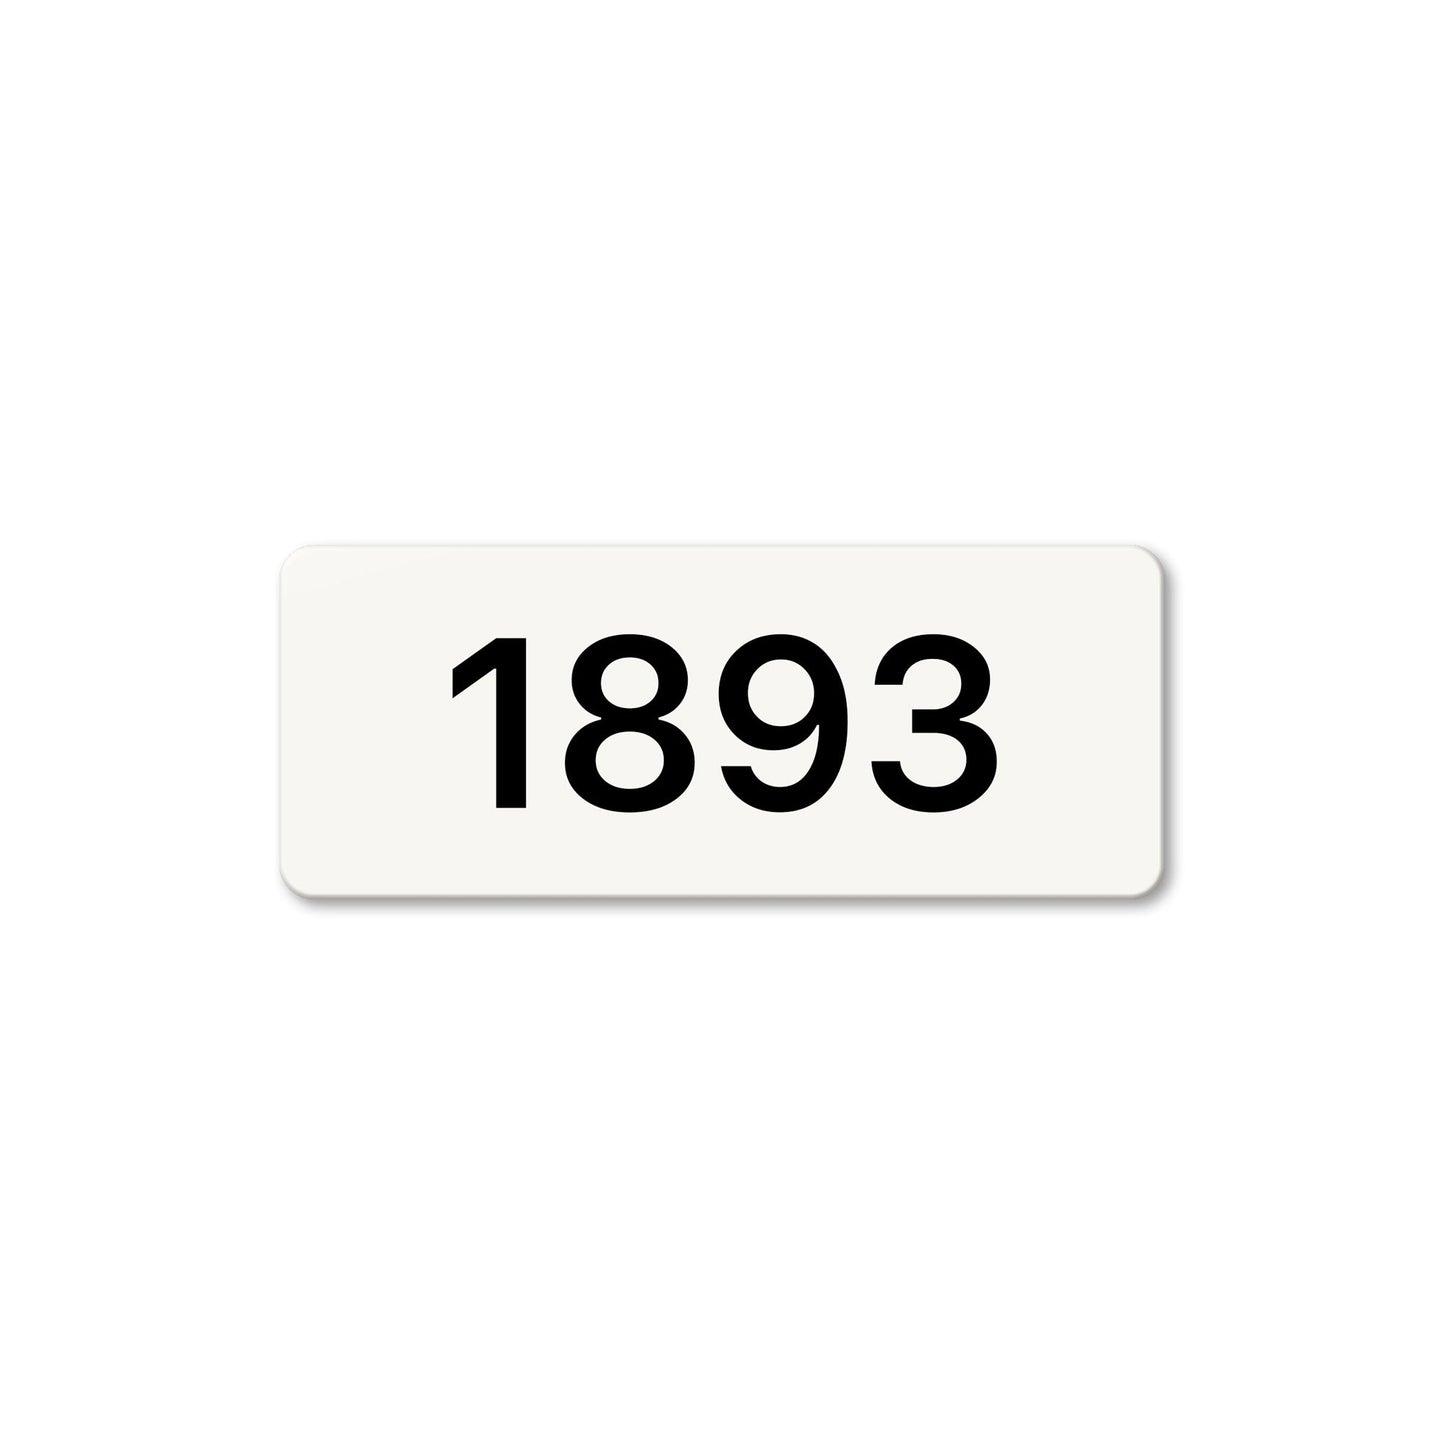 Numeral 1893